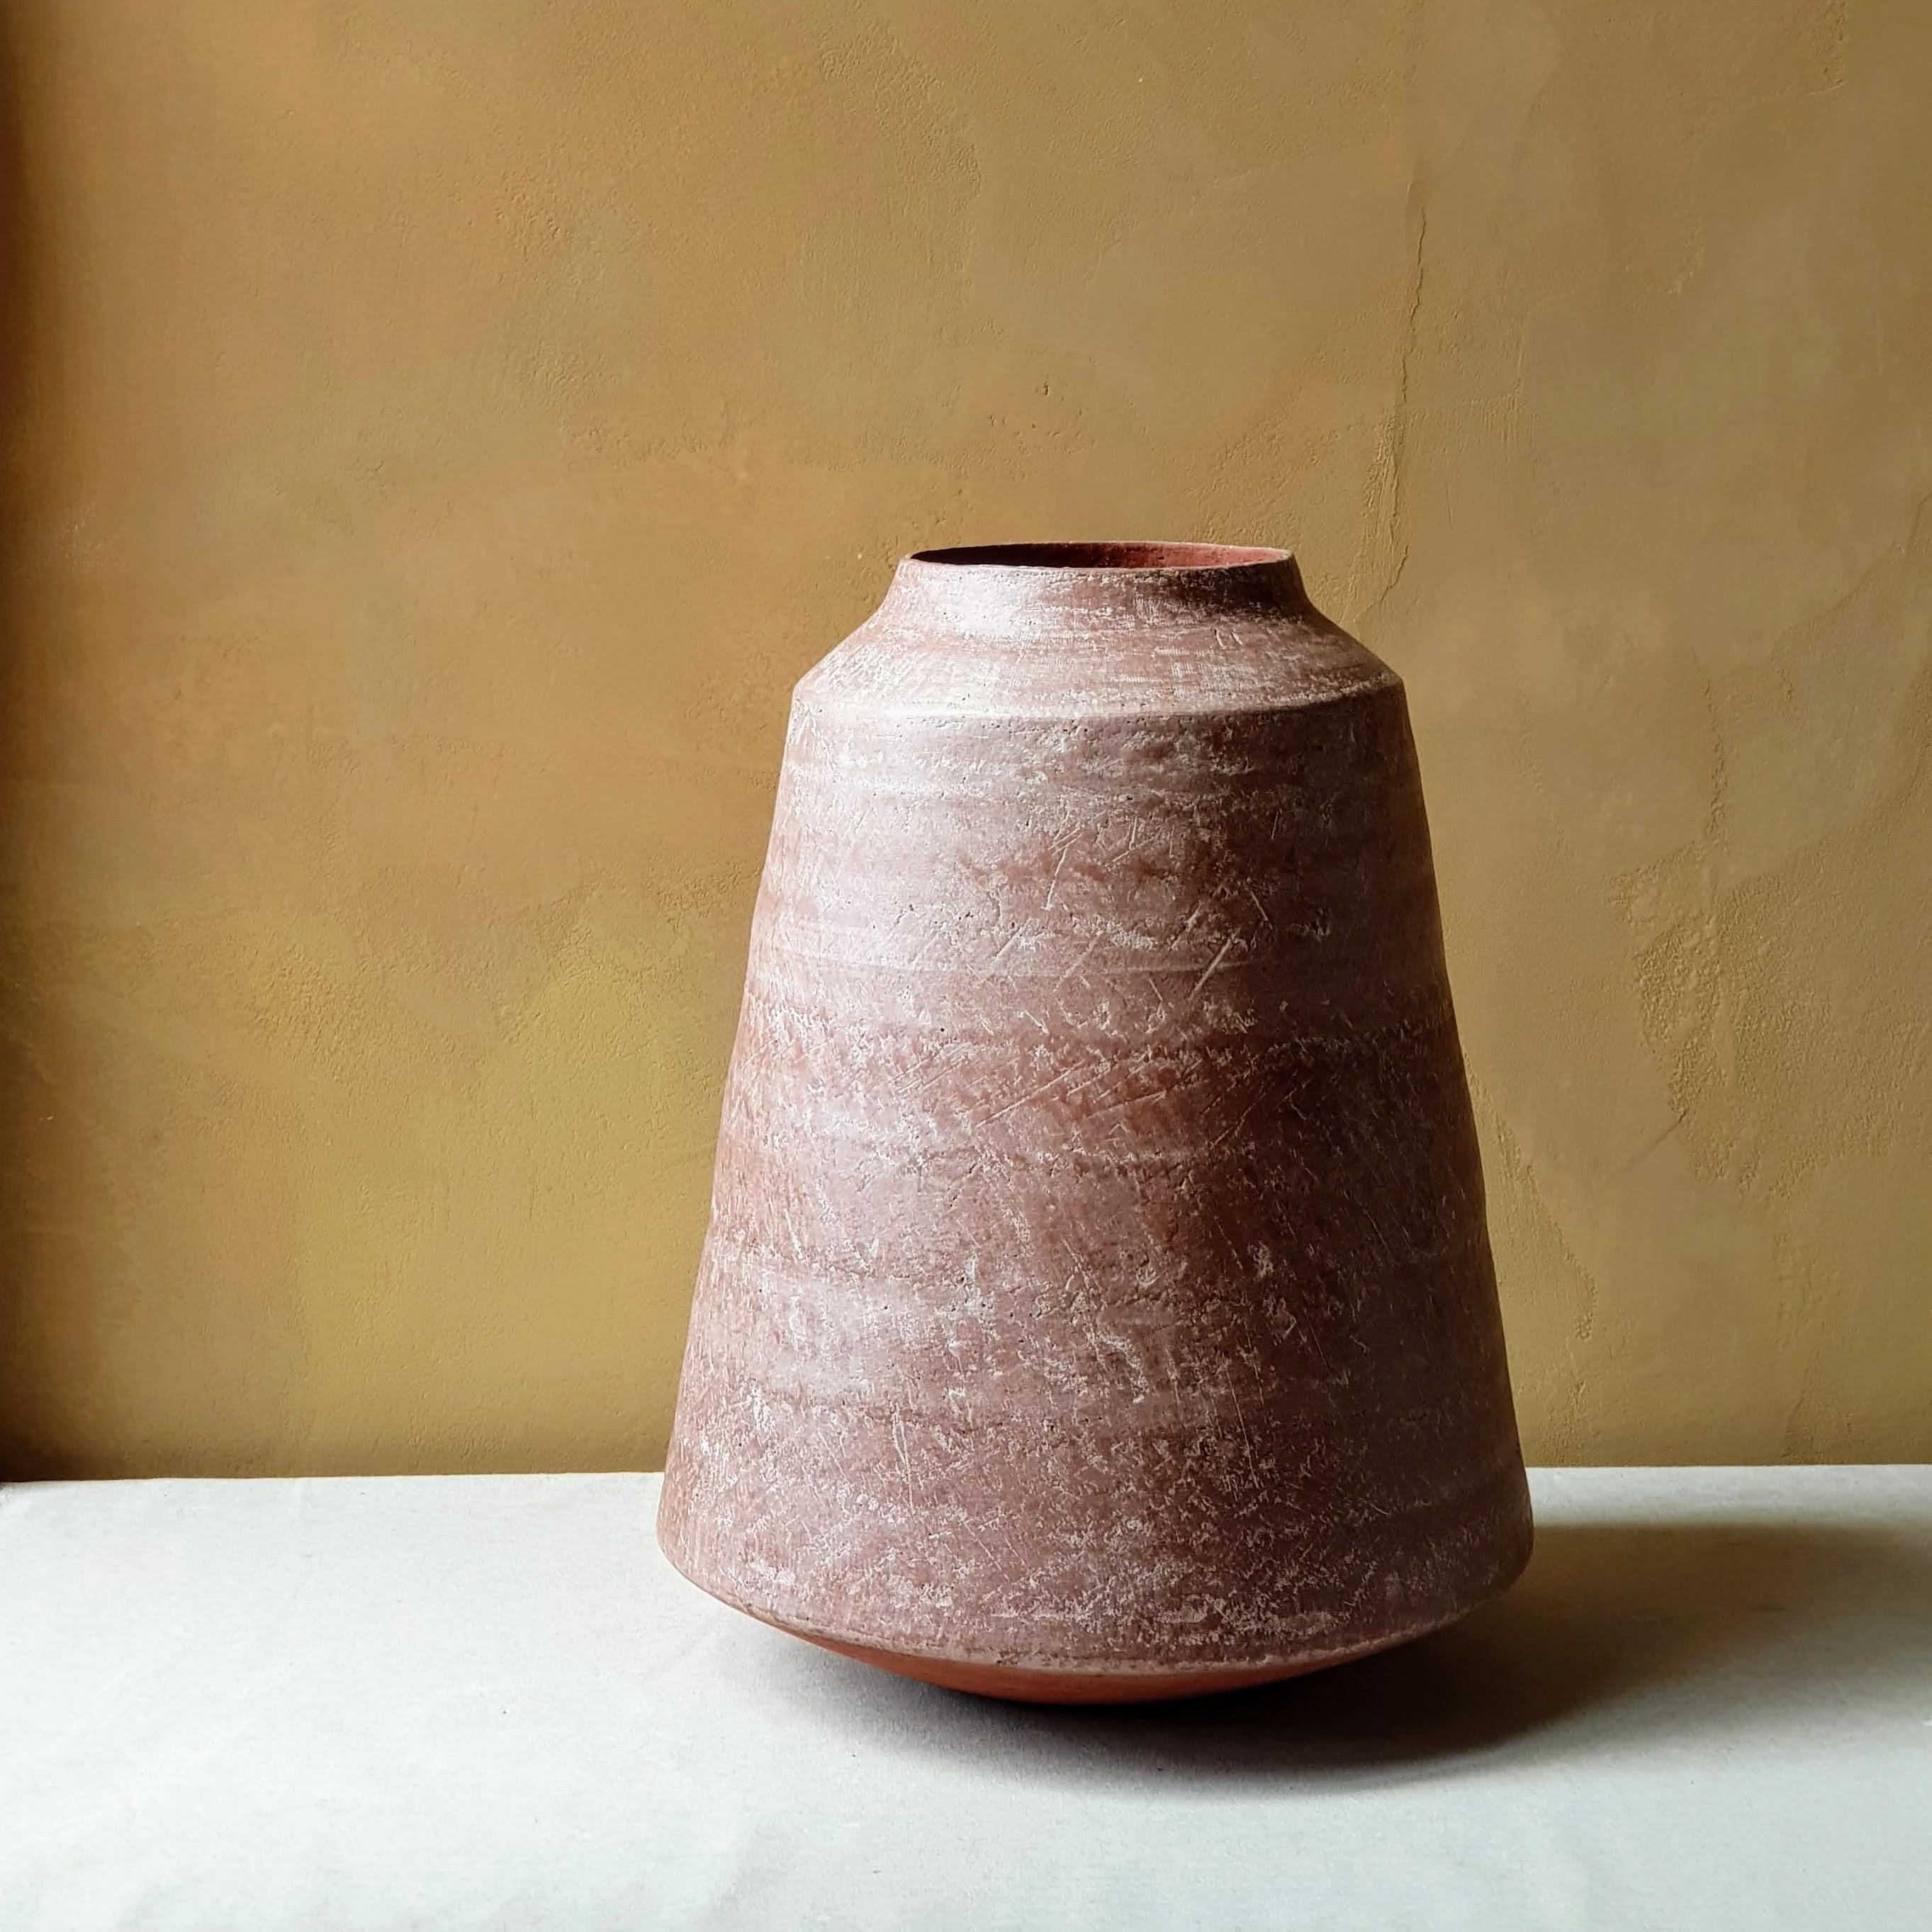 Red Stoneware Kados Vase by Elena Vasilantonaki
Unique
Dimensions: ⌀ 30 x H 25 cm (Dimensions may vary)
Materials: Stoneware
Available finishes: Black, White, Grey, Brown, Red, White Patina

Growing up in Greece I was surrounded by pottery forms